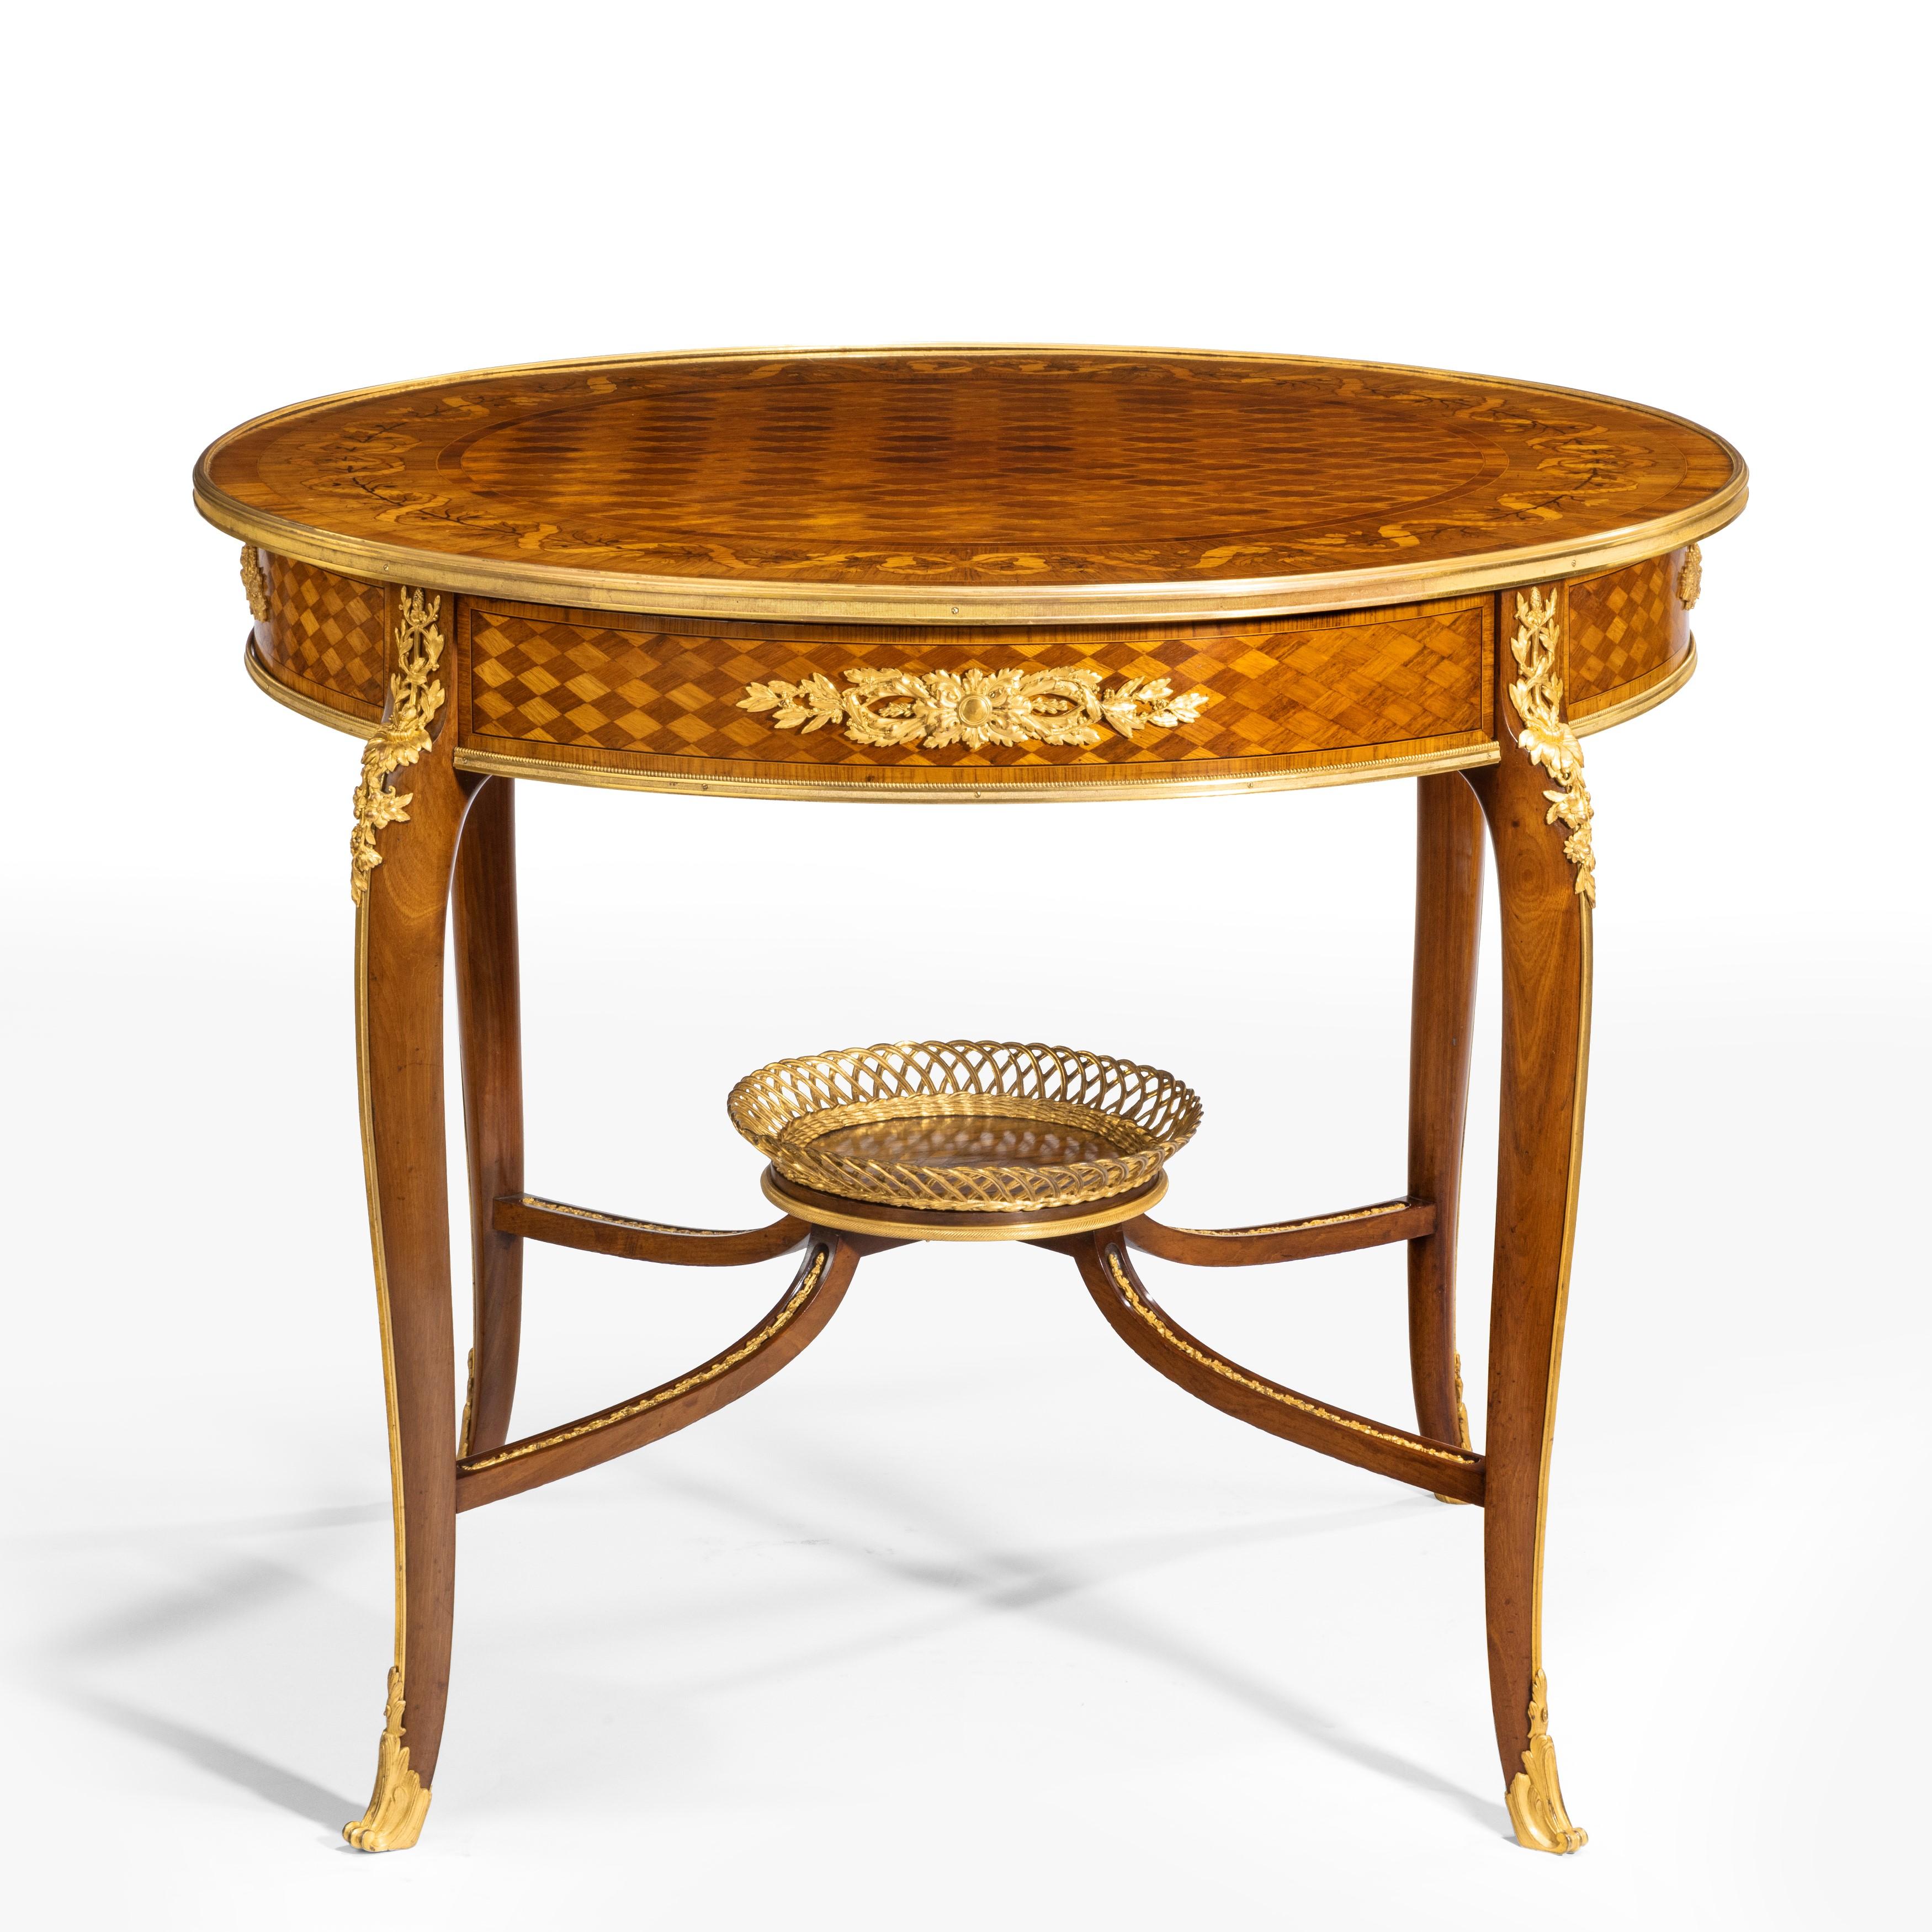 French 19th Century Parquetry Centre Table in the Louis XVI Manner by François Linke For Sale